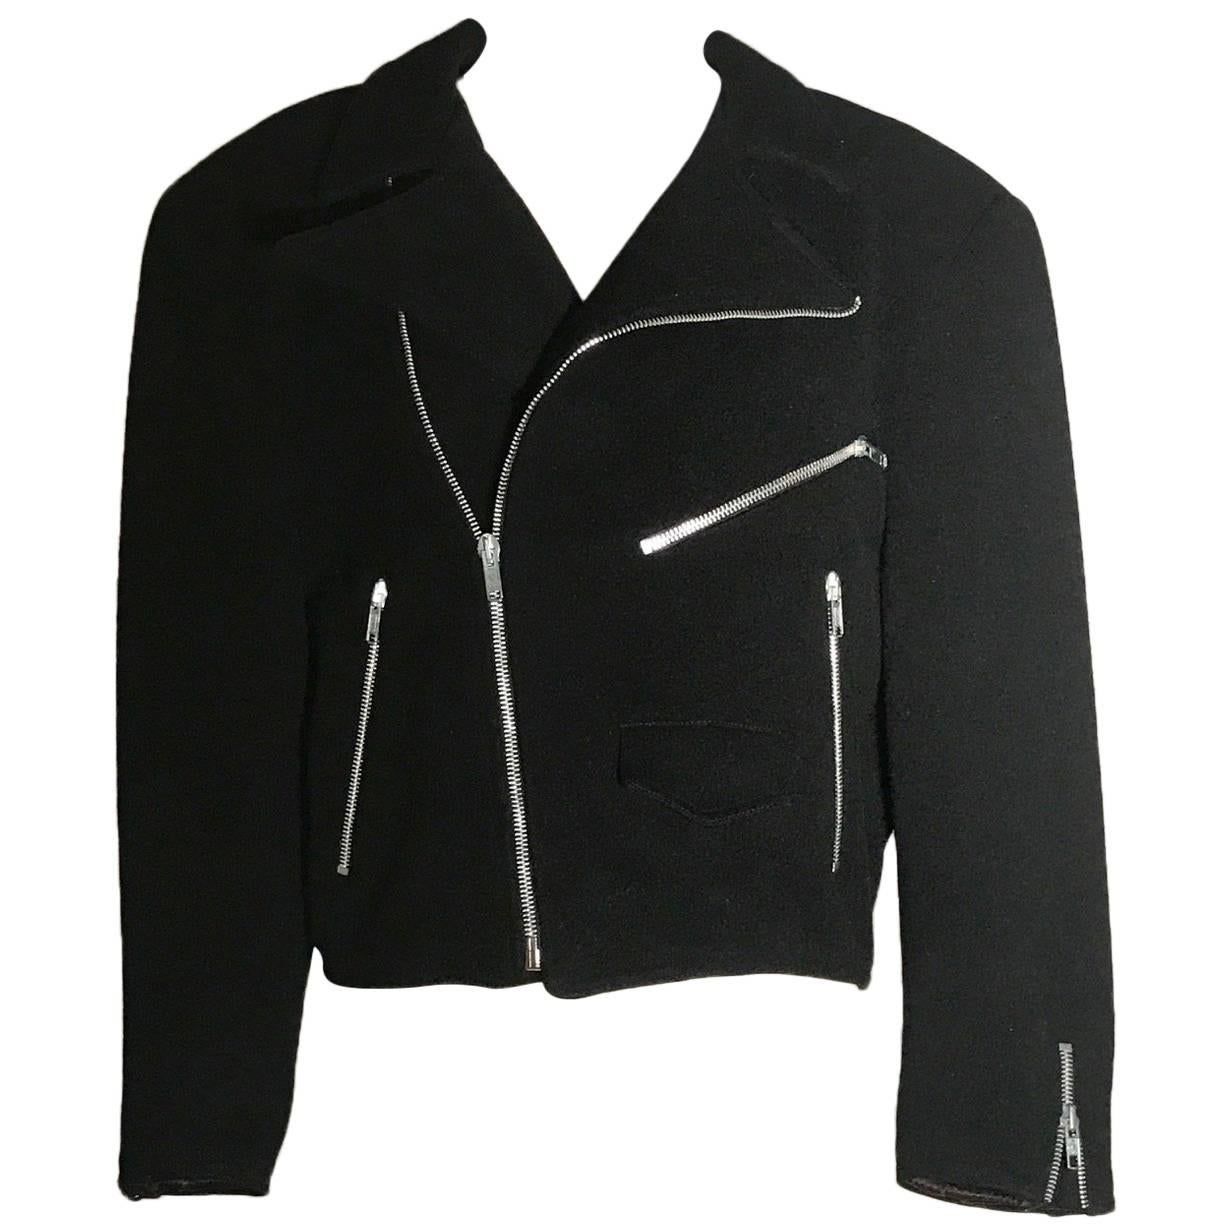 Sprouse by Stephen Sprouse Black Wool Biker Jacket with Zipper Pockets, 1980s 